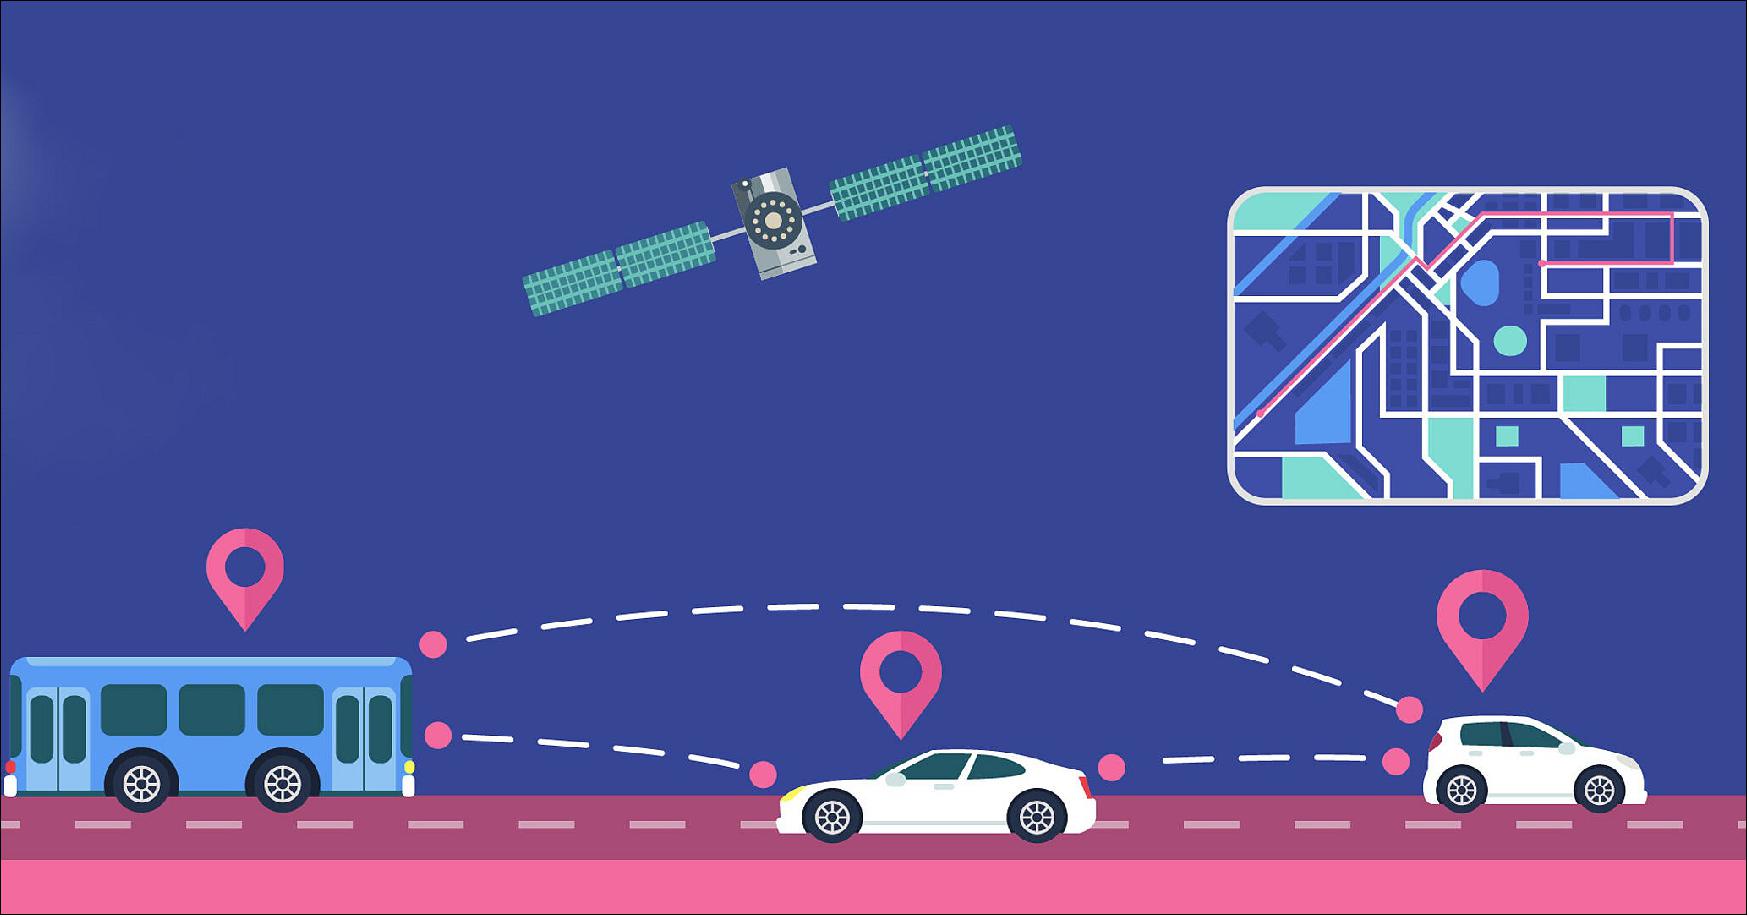 Figure 4: New precision Galileo services will support smart mobility approaches, such as assisted and autonomous vehicles (image credit: EUSPA)